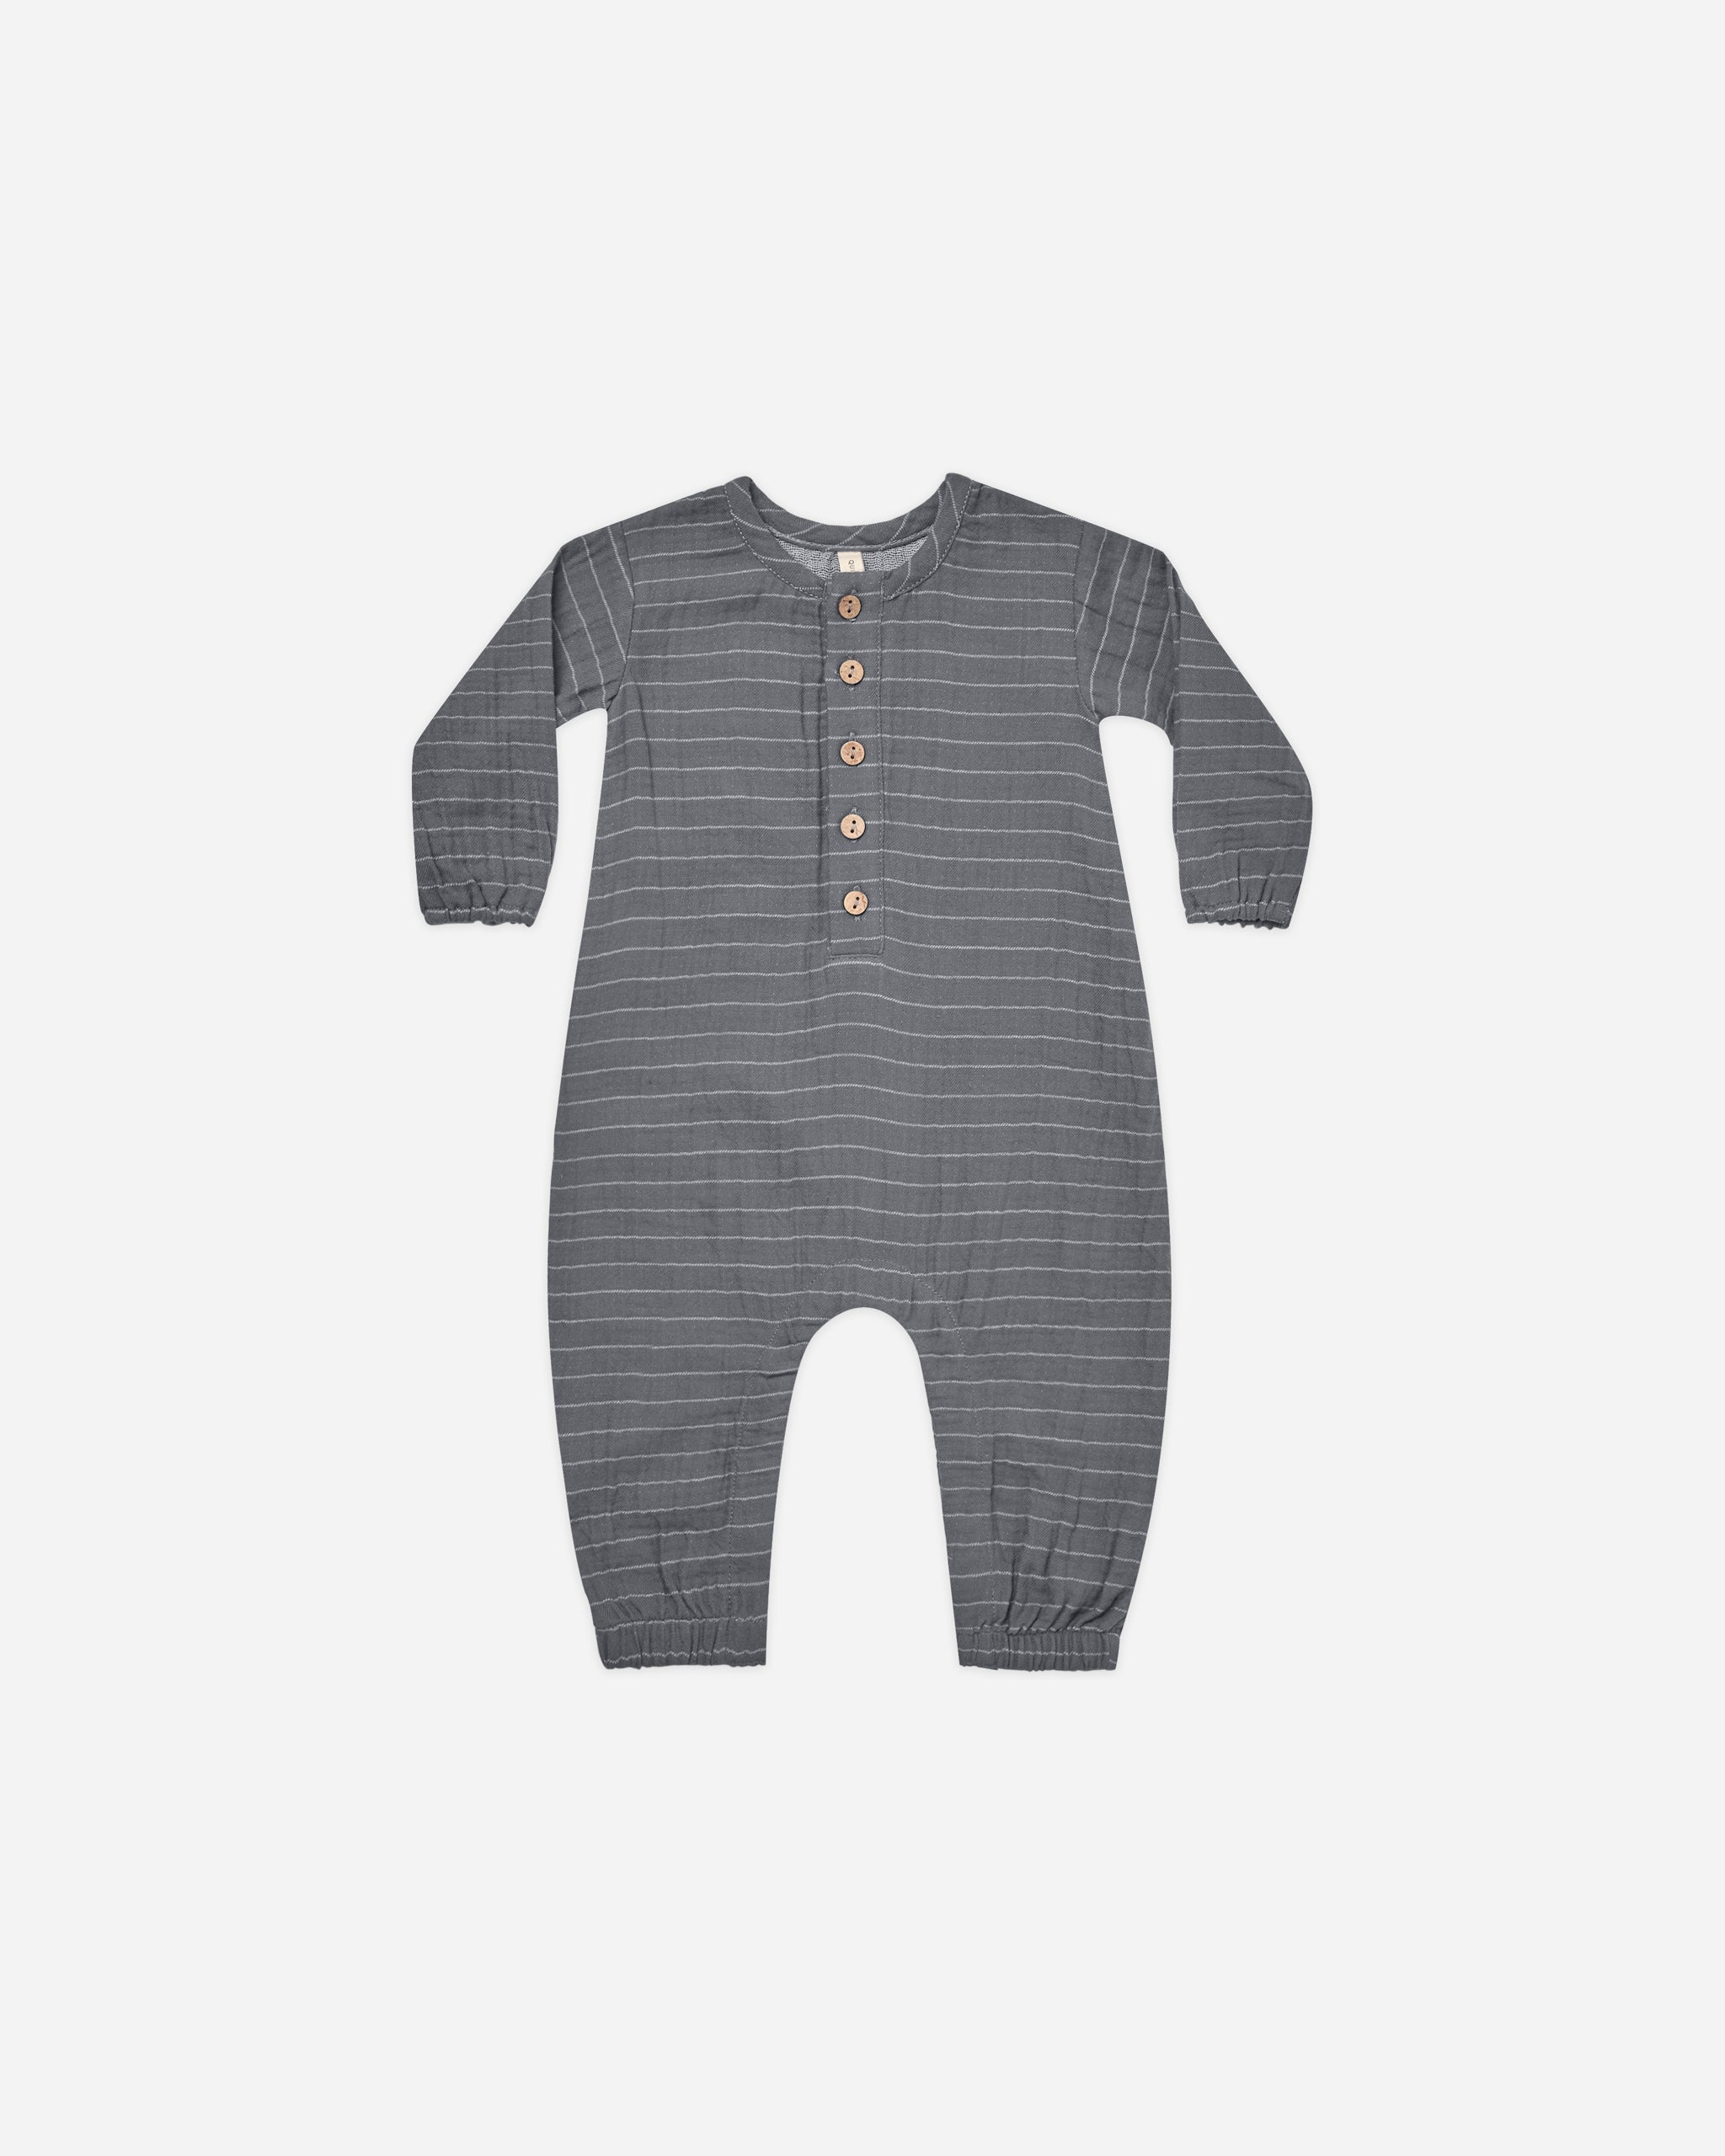 Woven Jumpsuit || Navy Vintage Stripe - Rylee + Cru | Kids Clothes | Trendy Baby Clothes | Modern Infant Outfits |